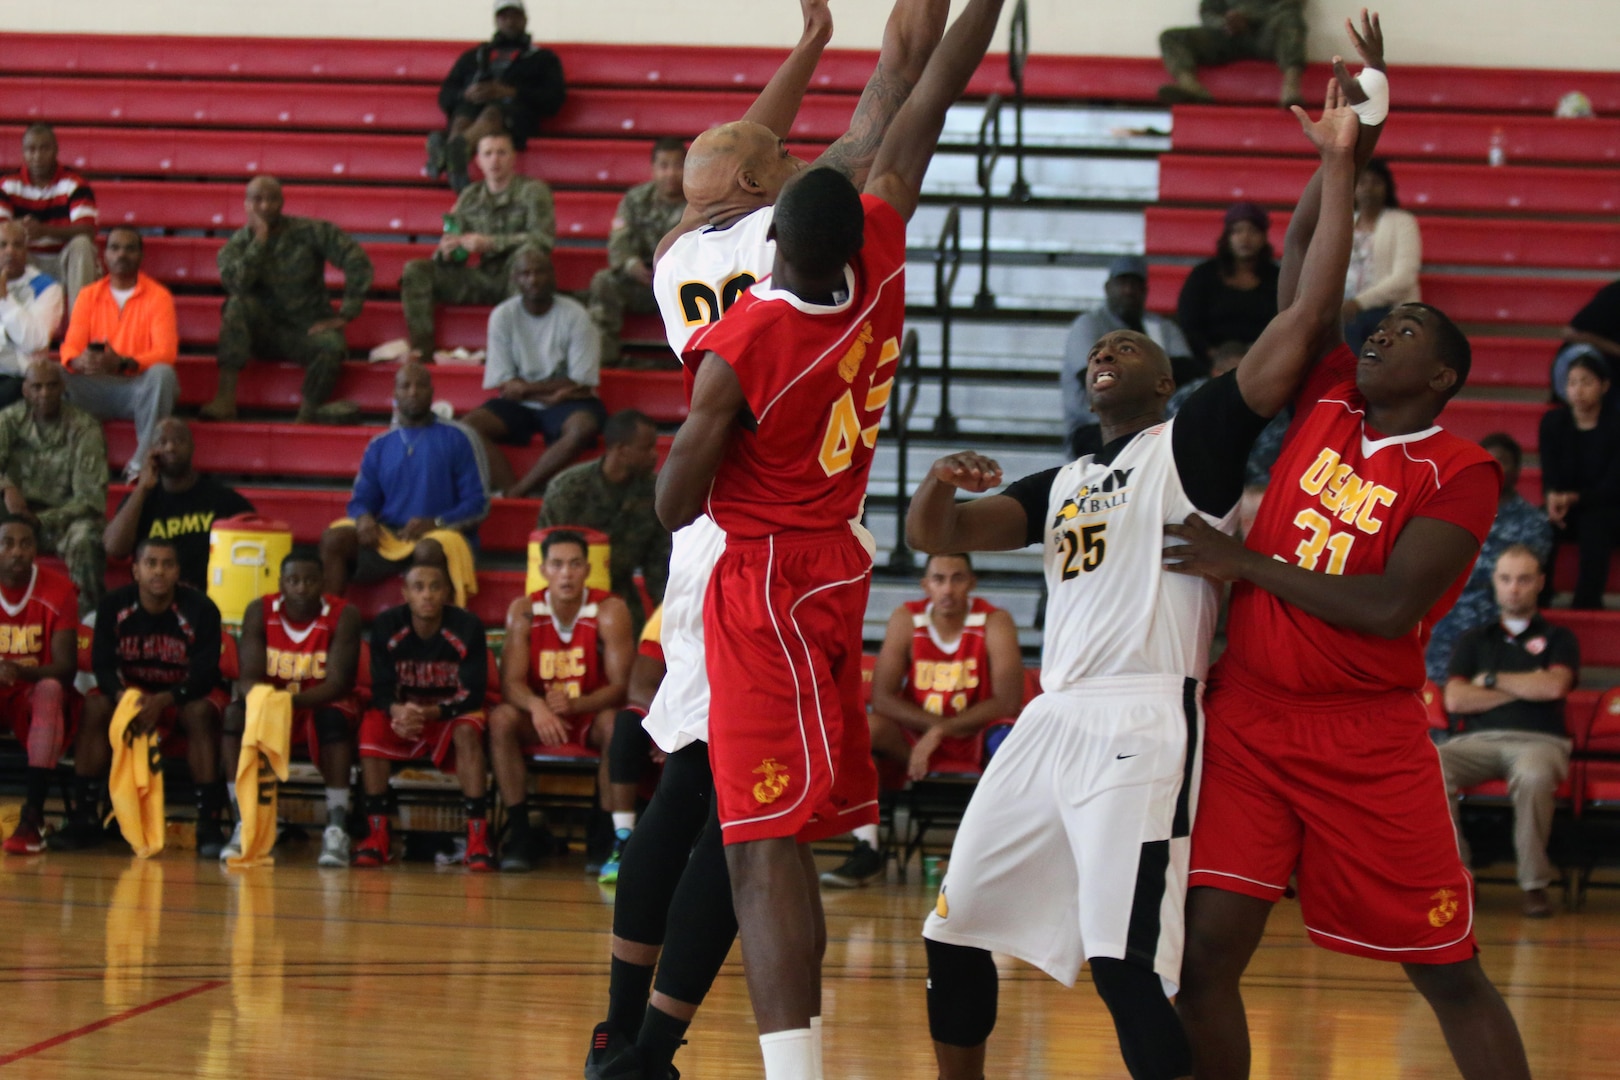 Army and Marines battle it out as Army dominates 107 - 63.  The 2016 Armed Forces Men's Basketball Championship held at MCB Quantico, Va. from 1-7 November.  The best two teams during the double round robin will face each other for the 2016 Armed Forces crown.  